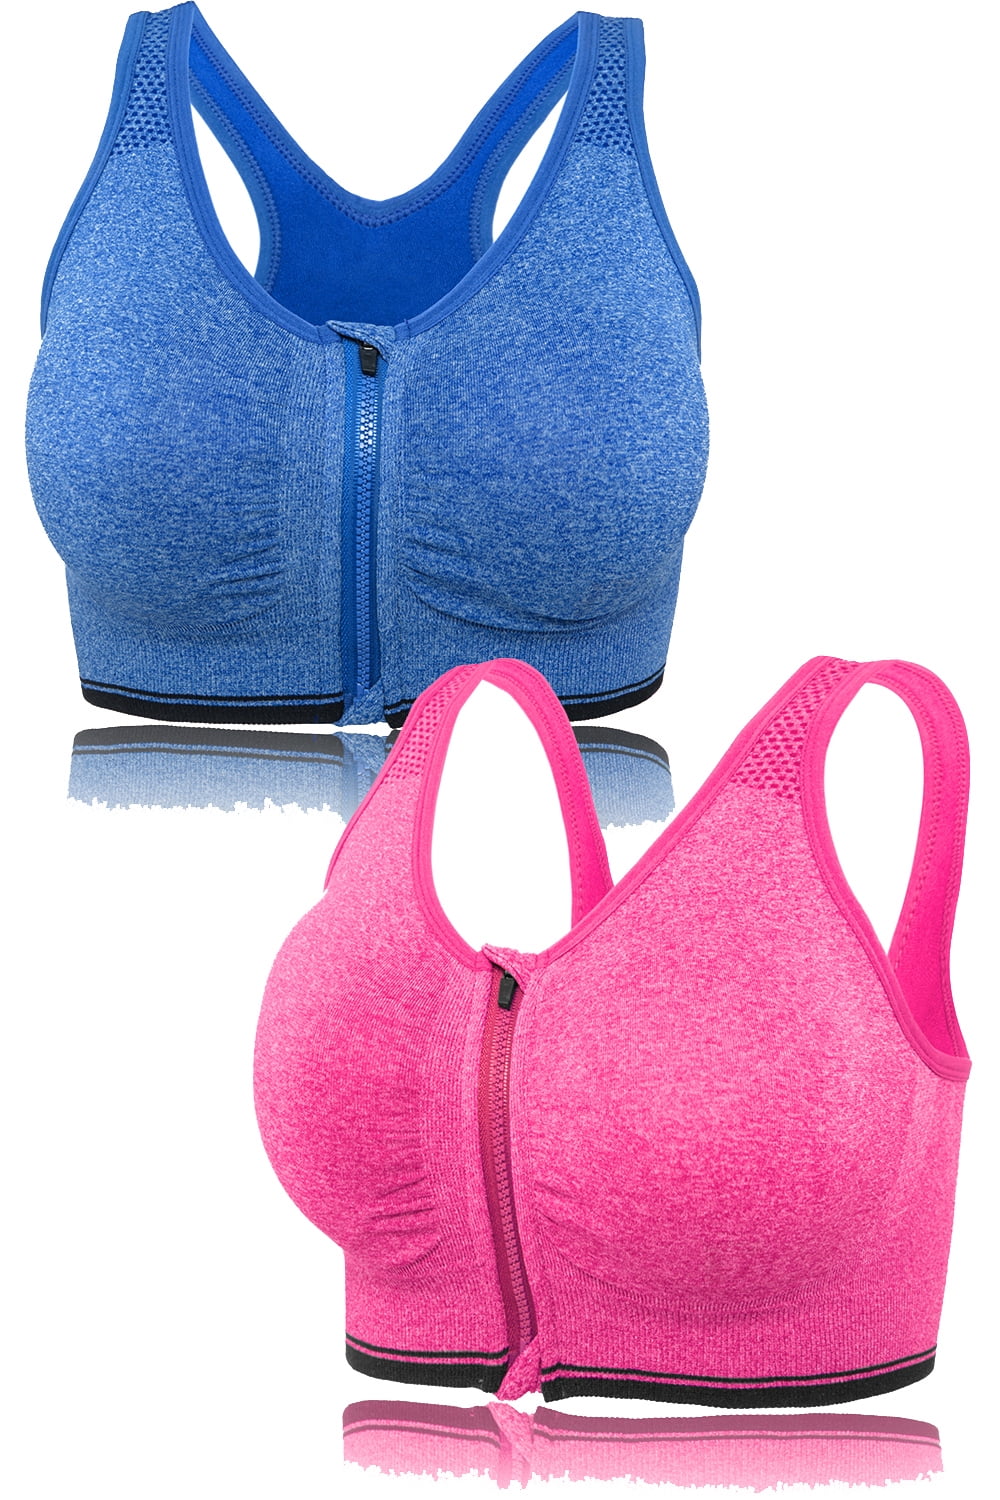 FANNYC 1-3 Pack Sports Bra for Women Criss-Cross Back Strappy Longline Sports  Bras Medium Support Yoga Workout Bra with Removable Cups 